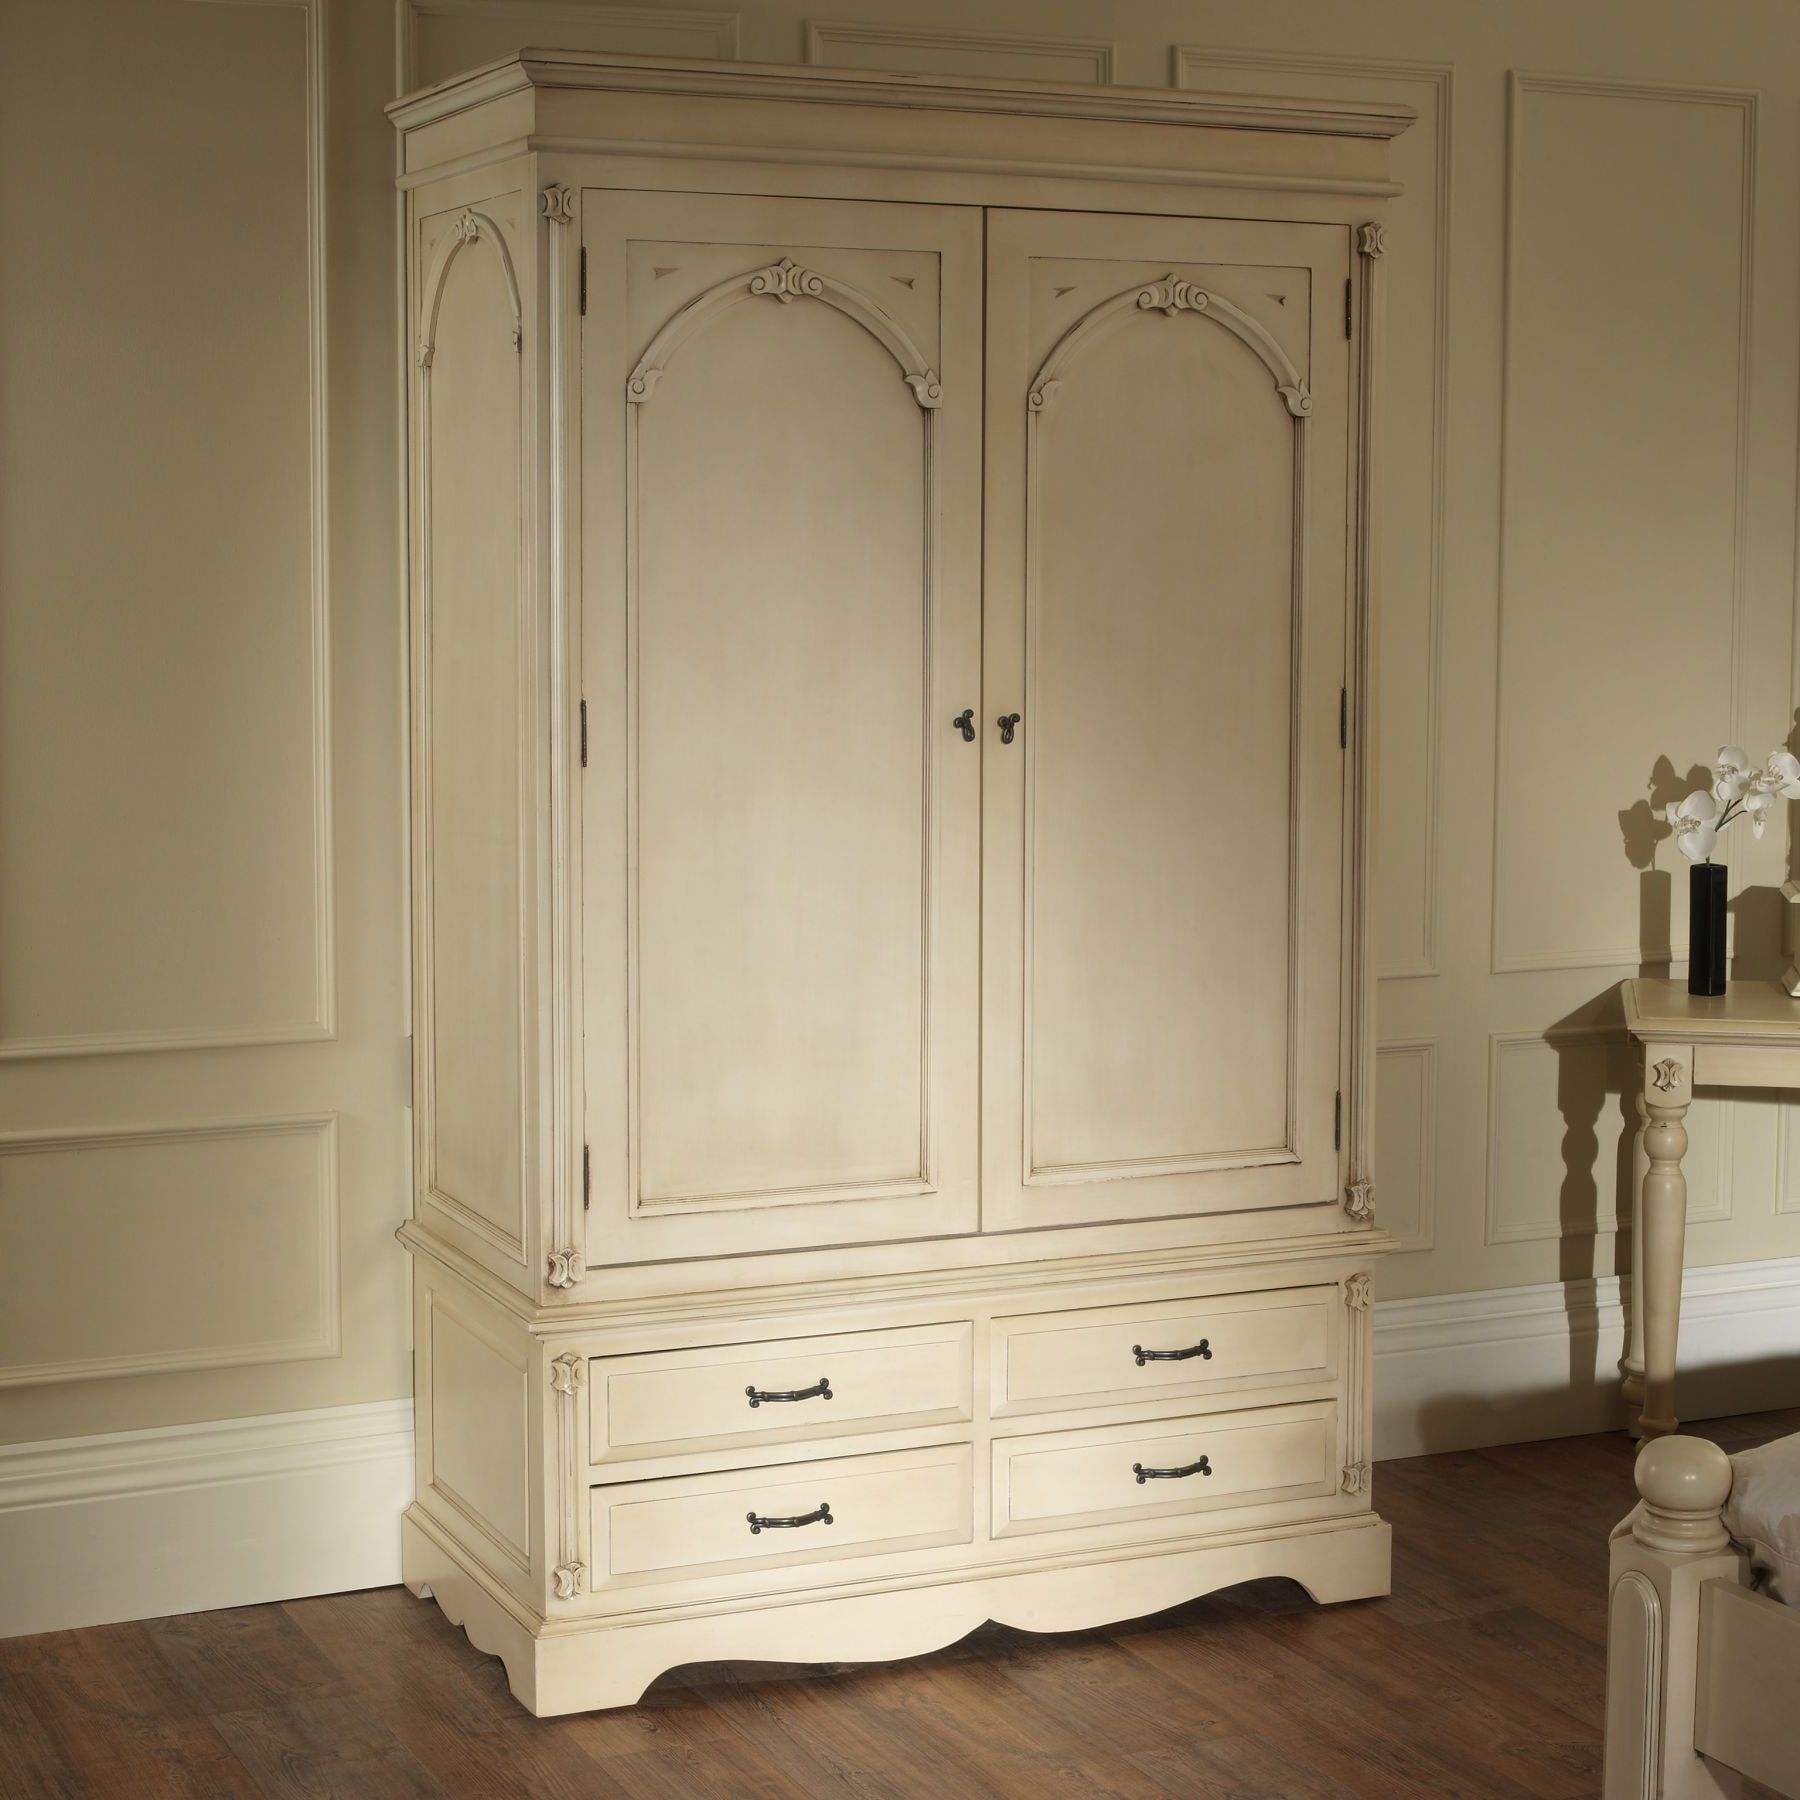 Victorian Antique French Wardrobe Works Well Alongside Our Shabby Chic  Furniture Pertaining To Vintage Shabby Chic Wardrobes (View 16 of 20)